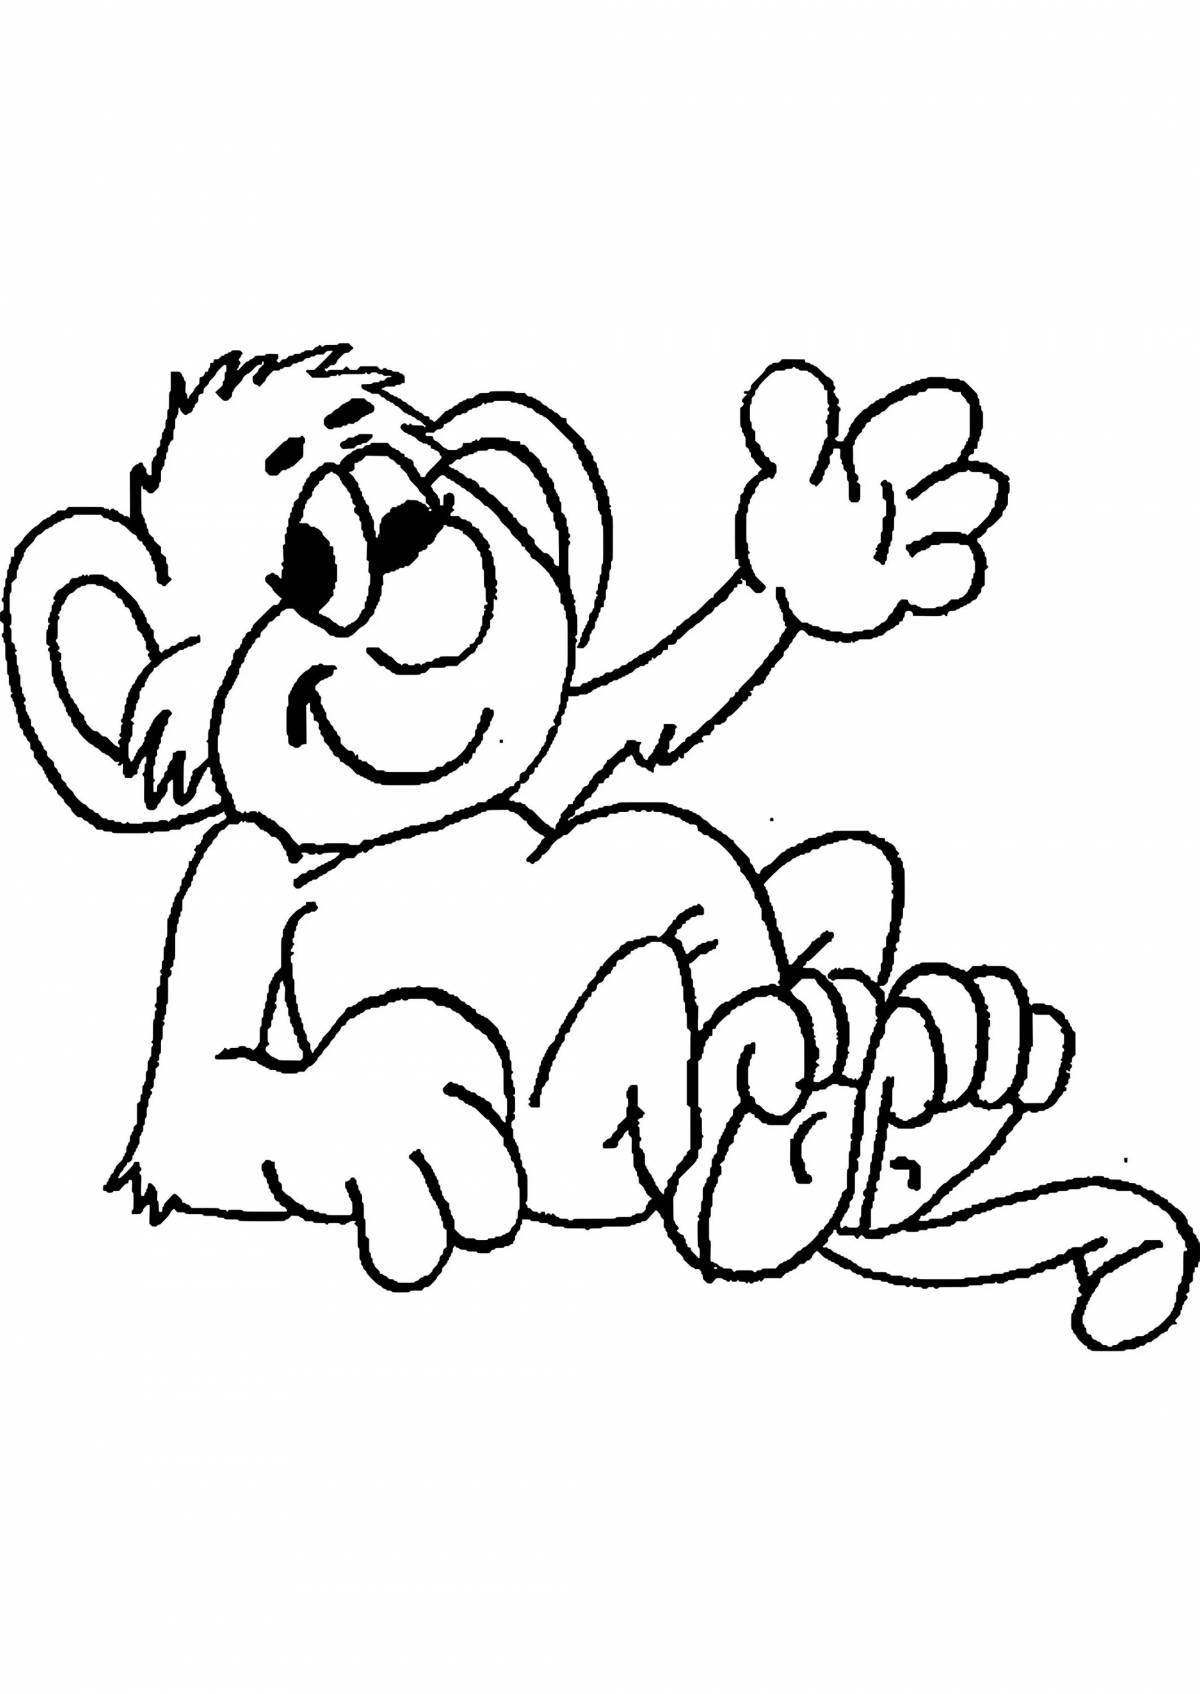 Animated drawing of a monkey for children